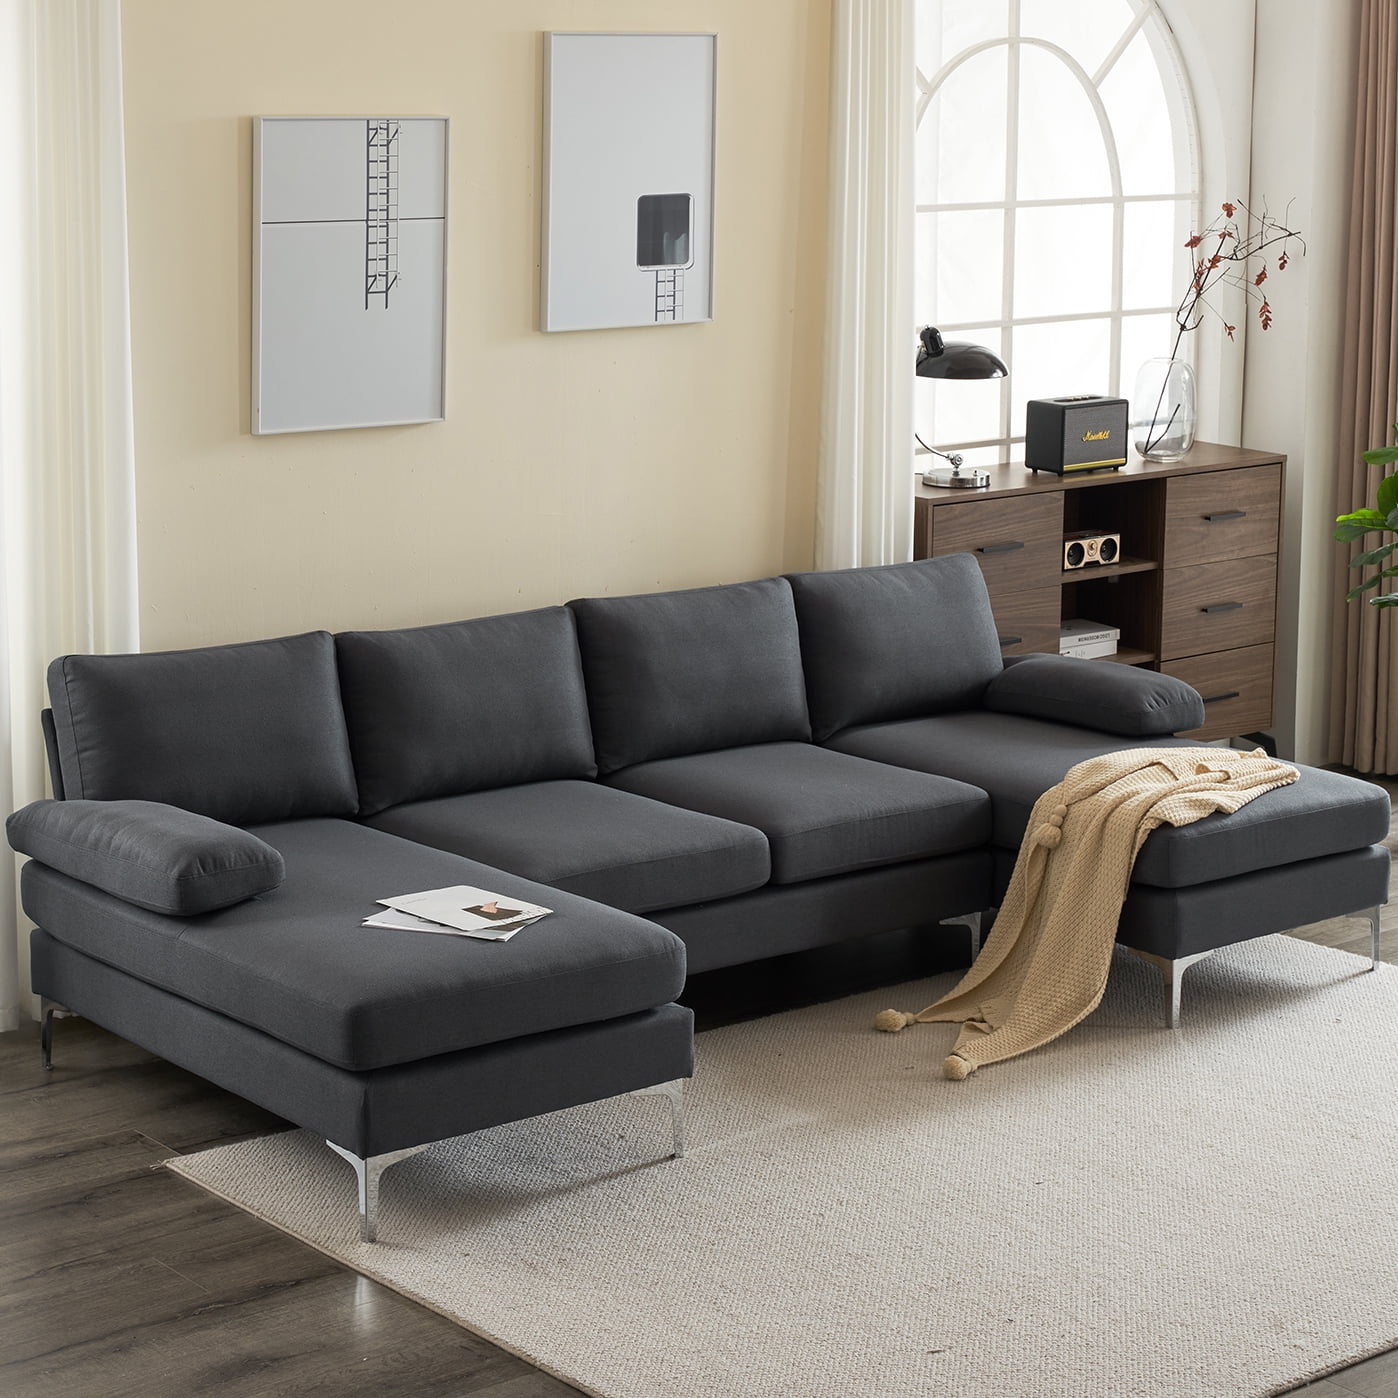 Contemporary Sectional Modern Sofa Bed